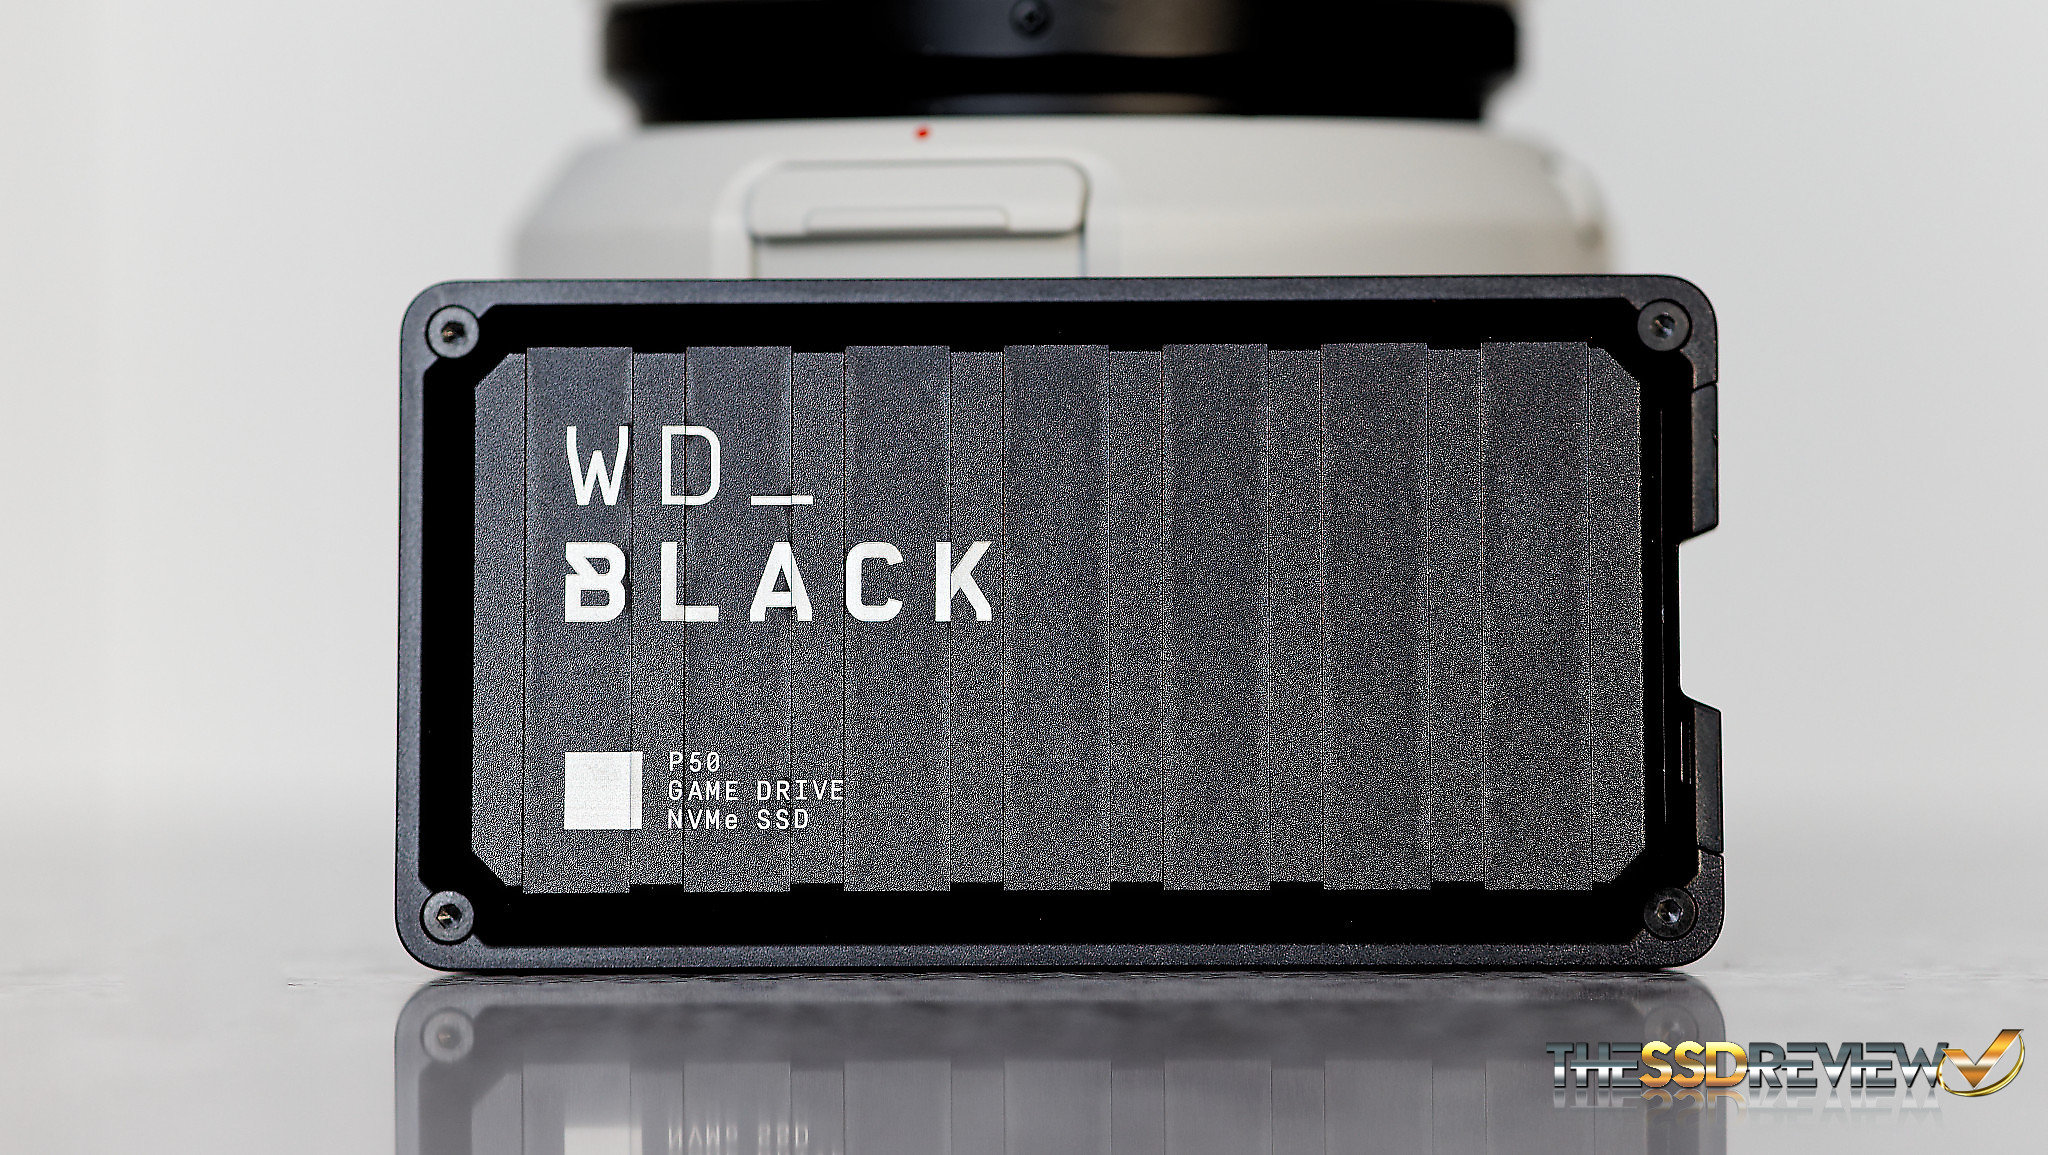 Wd Black 4tb P50 Ssd Reviewed Wd Intros 4tb Capacity Of P50 Extreme And My Passport Ssds The Ssd Review